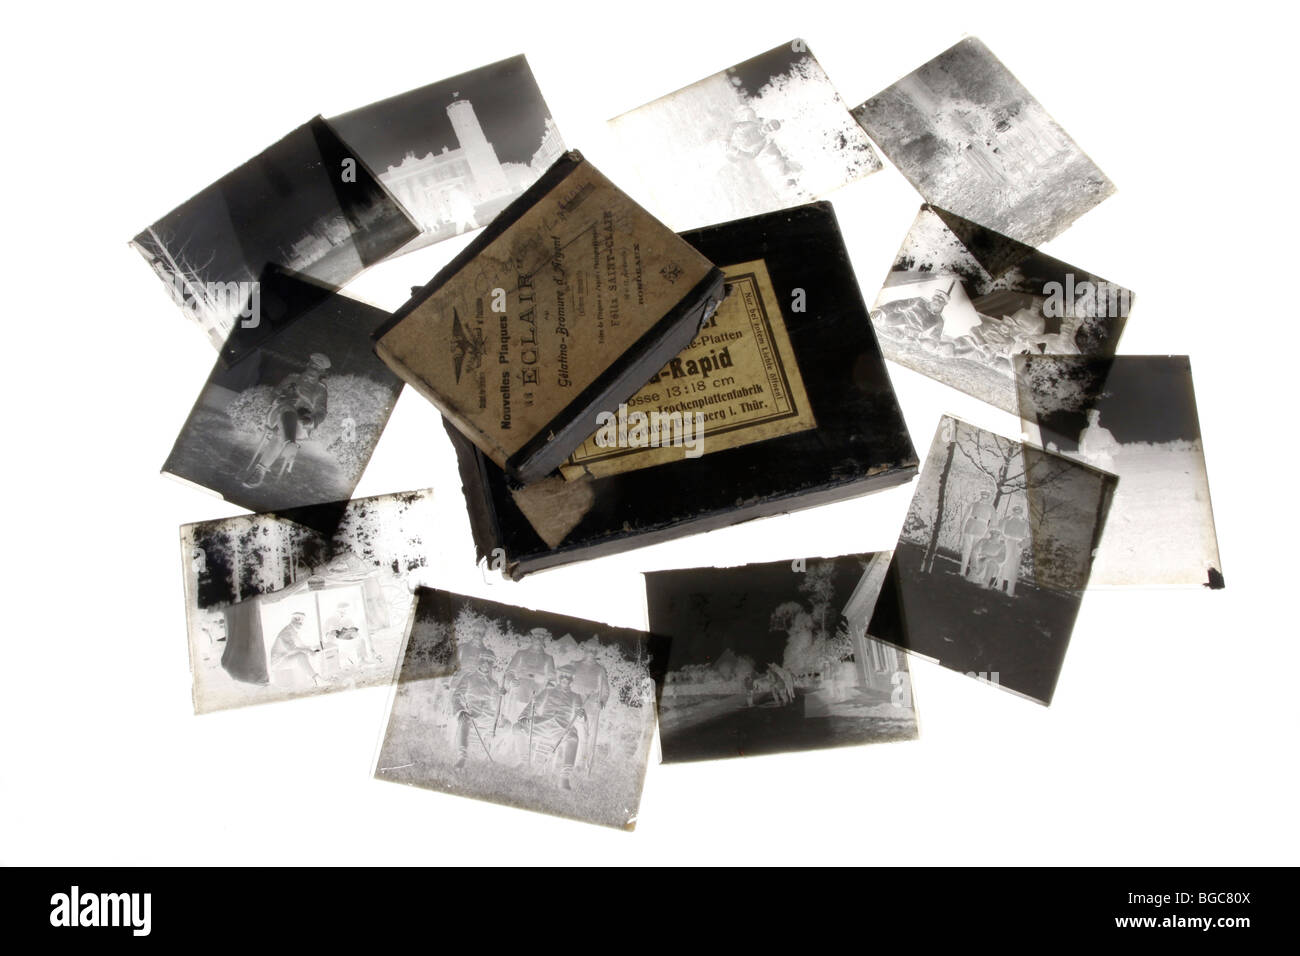 Old photographs on silver bromide gelatin dry plates Stock Photo